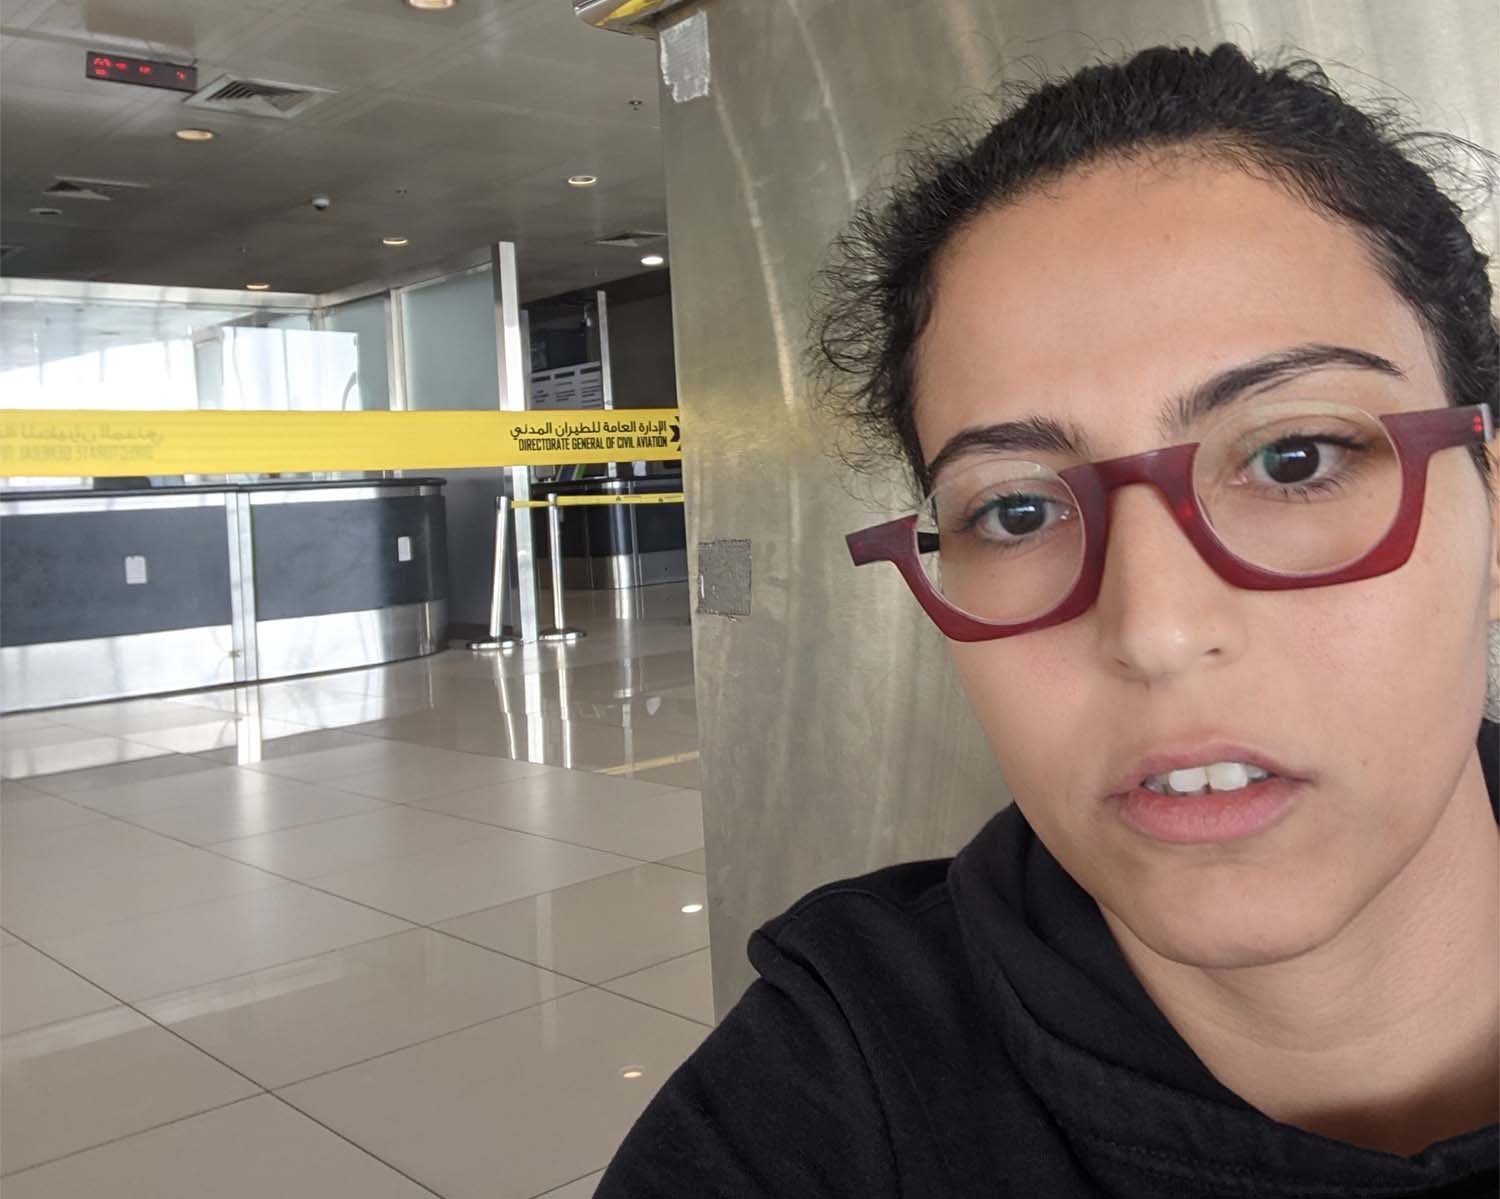 Mona Kareem was calling for help on Twitter while at Kuwait International Airport 